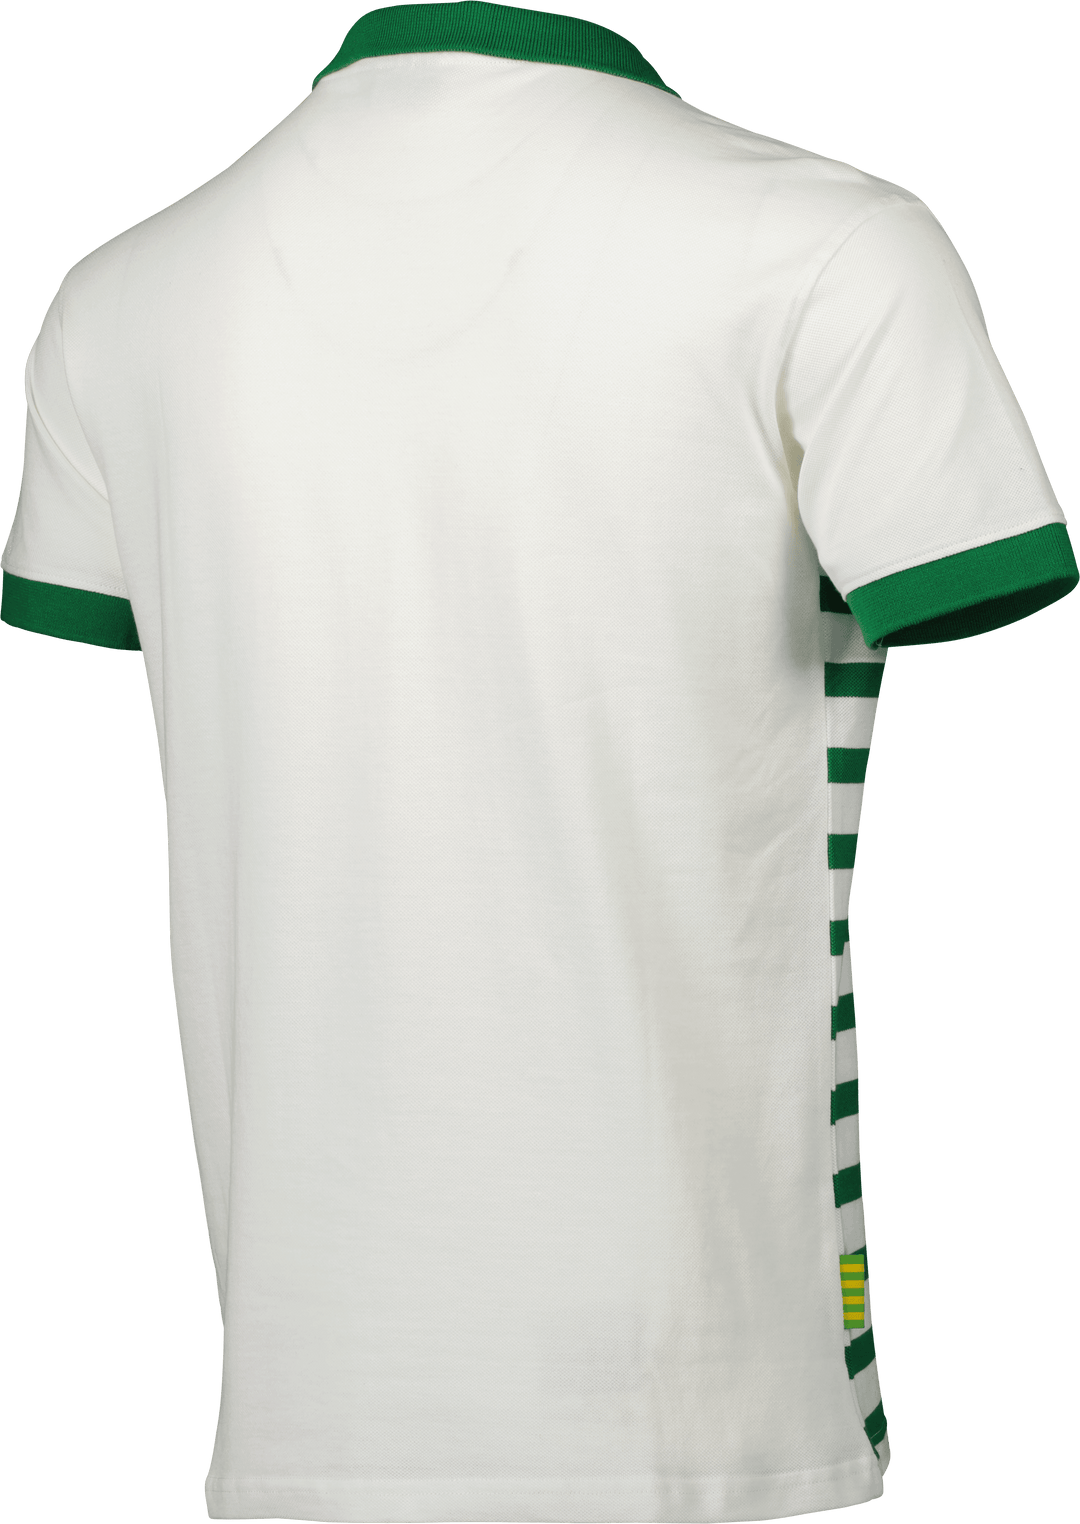 ROWDIES MEN'S WHITE STRIPED CREST POLO - The Bay Republic | Team Store of the Tampa Bay Rays & Rowdies